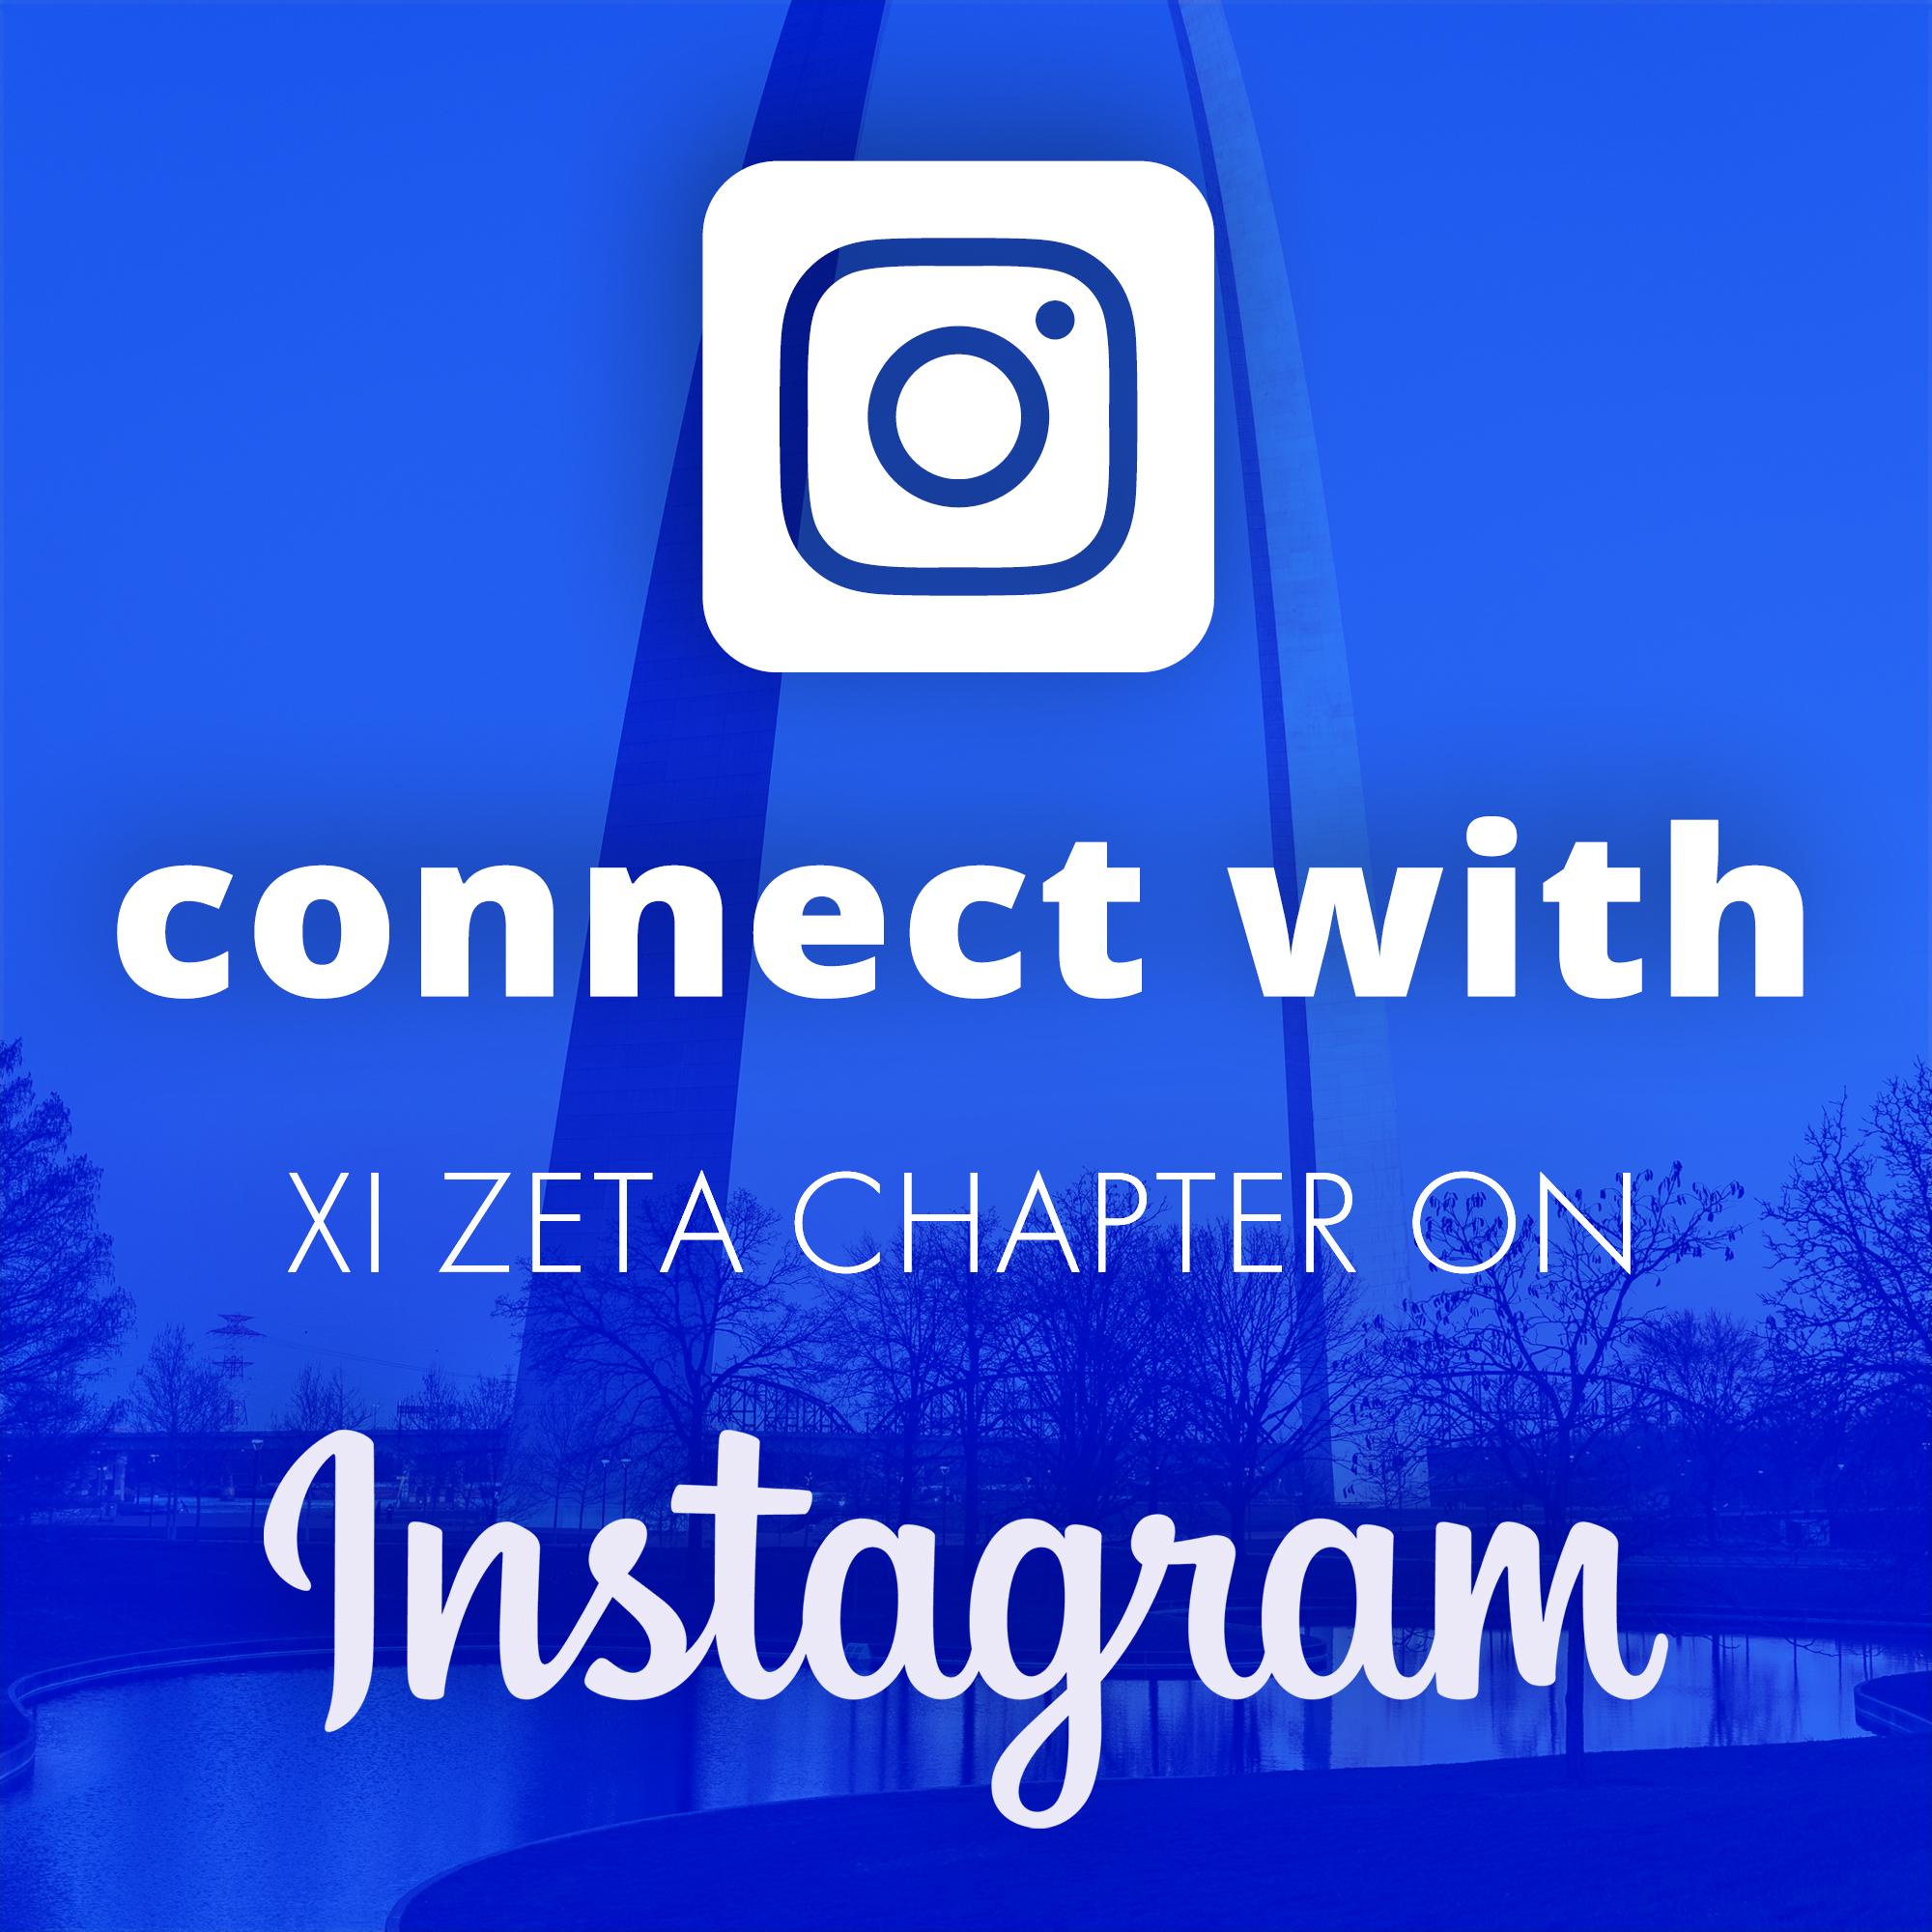 Connect With Xi Zeta Chapter on Instagram